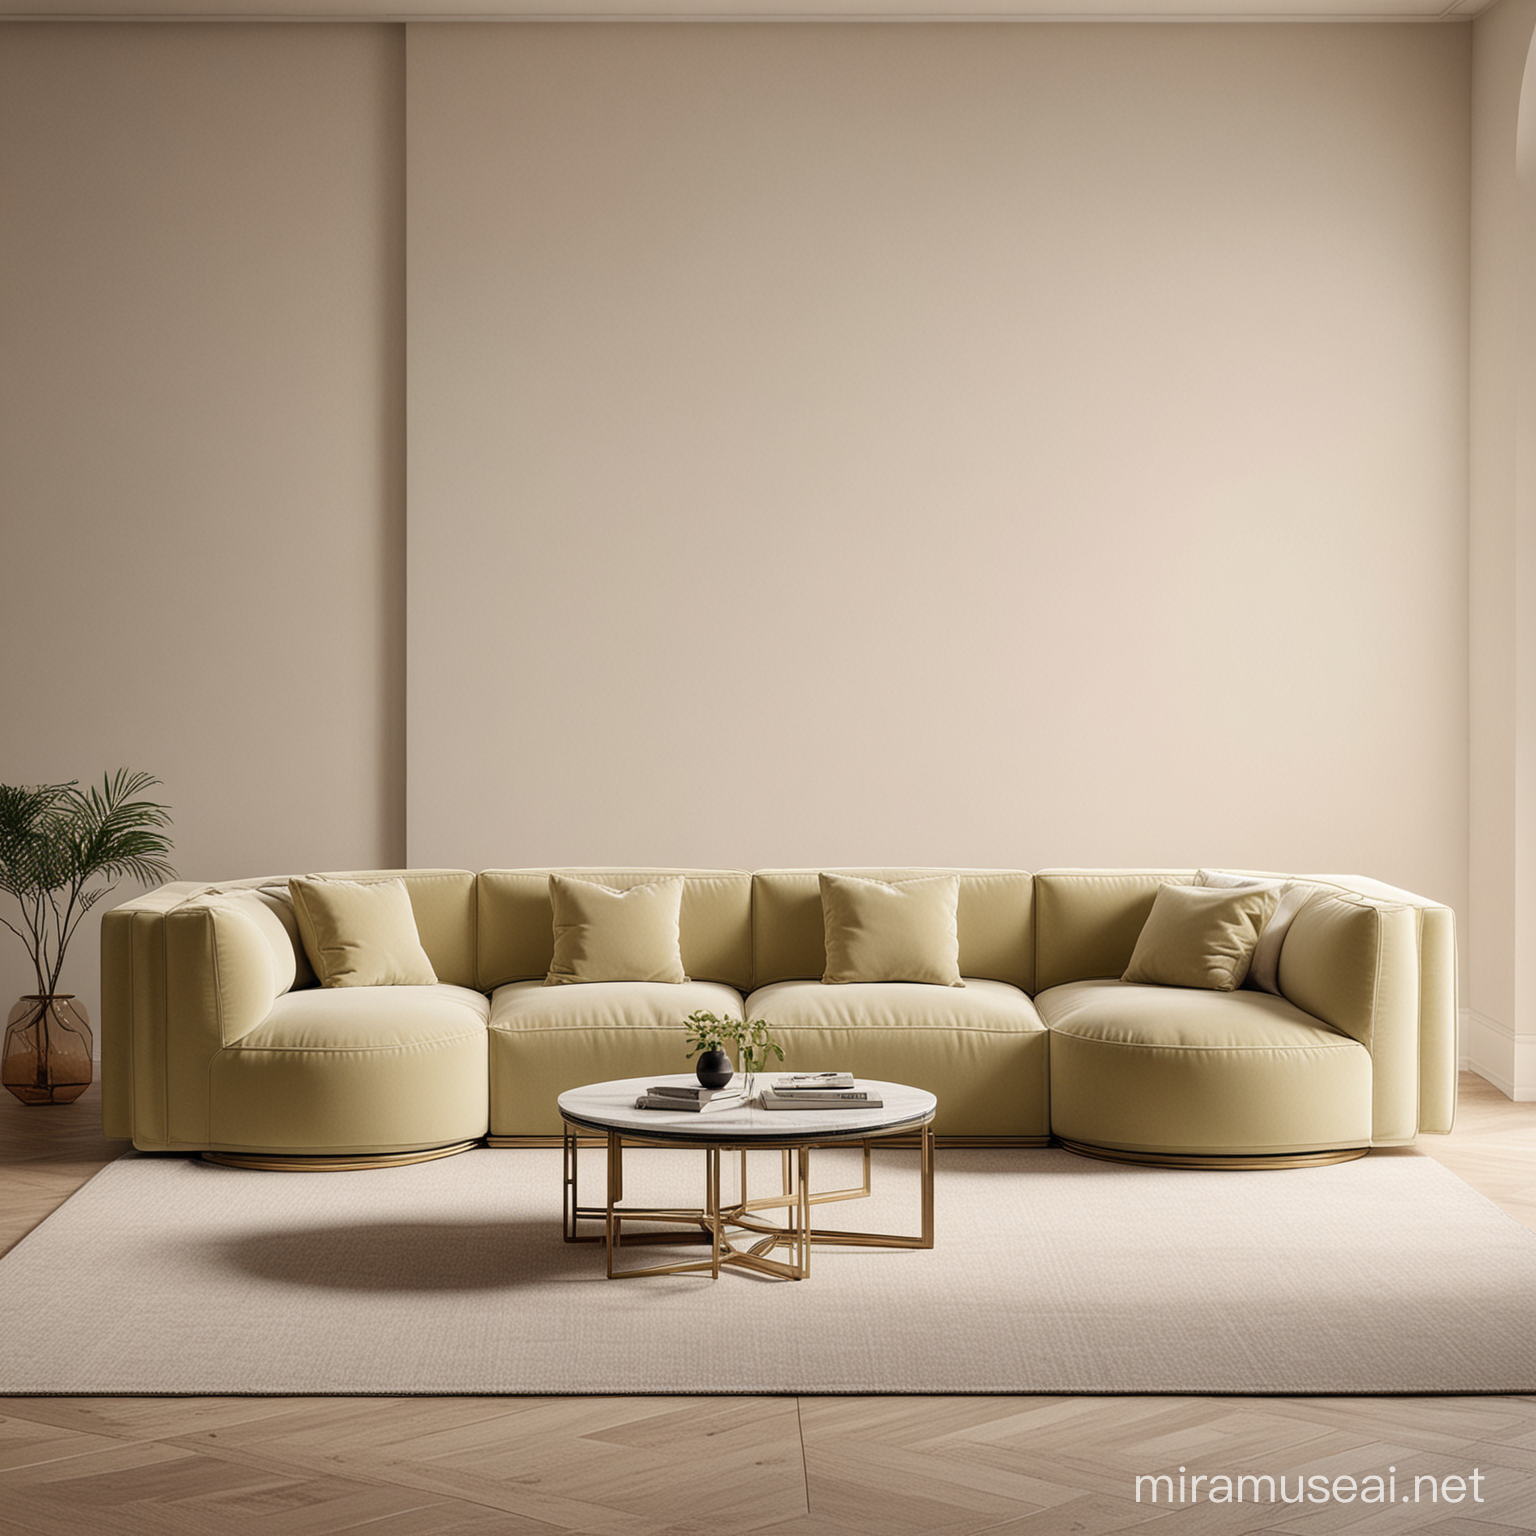 Contemporary Armchair in Organic Home Decor Setting